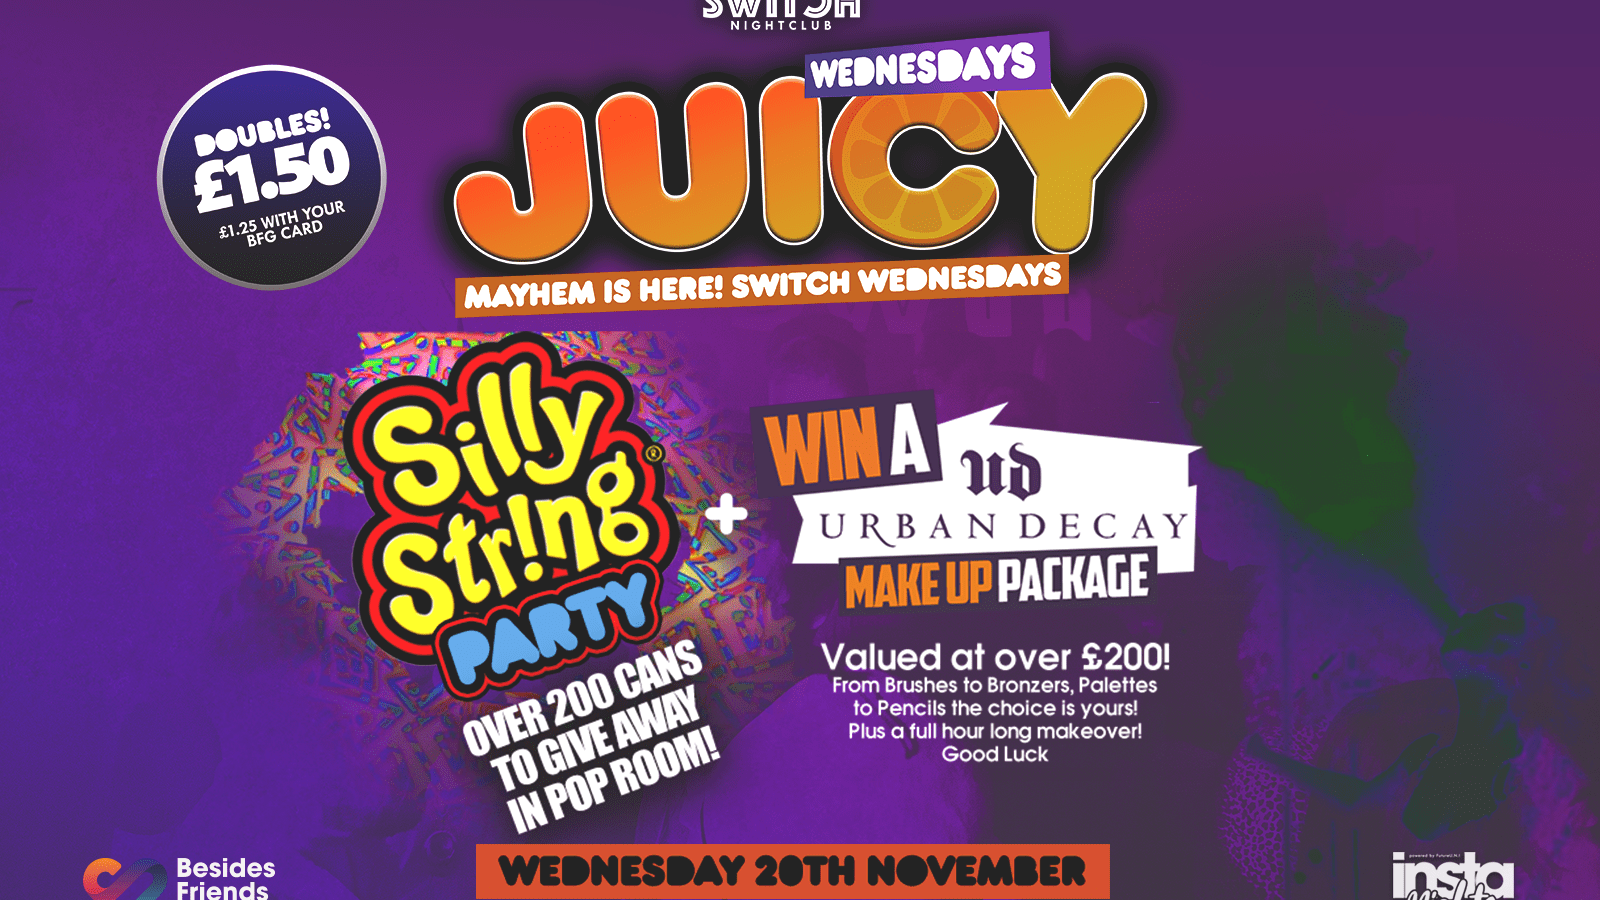 Juicy Wednesdays Presents Silly String Party + Urban Decay Makeup Package Giveaway